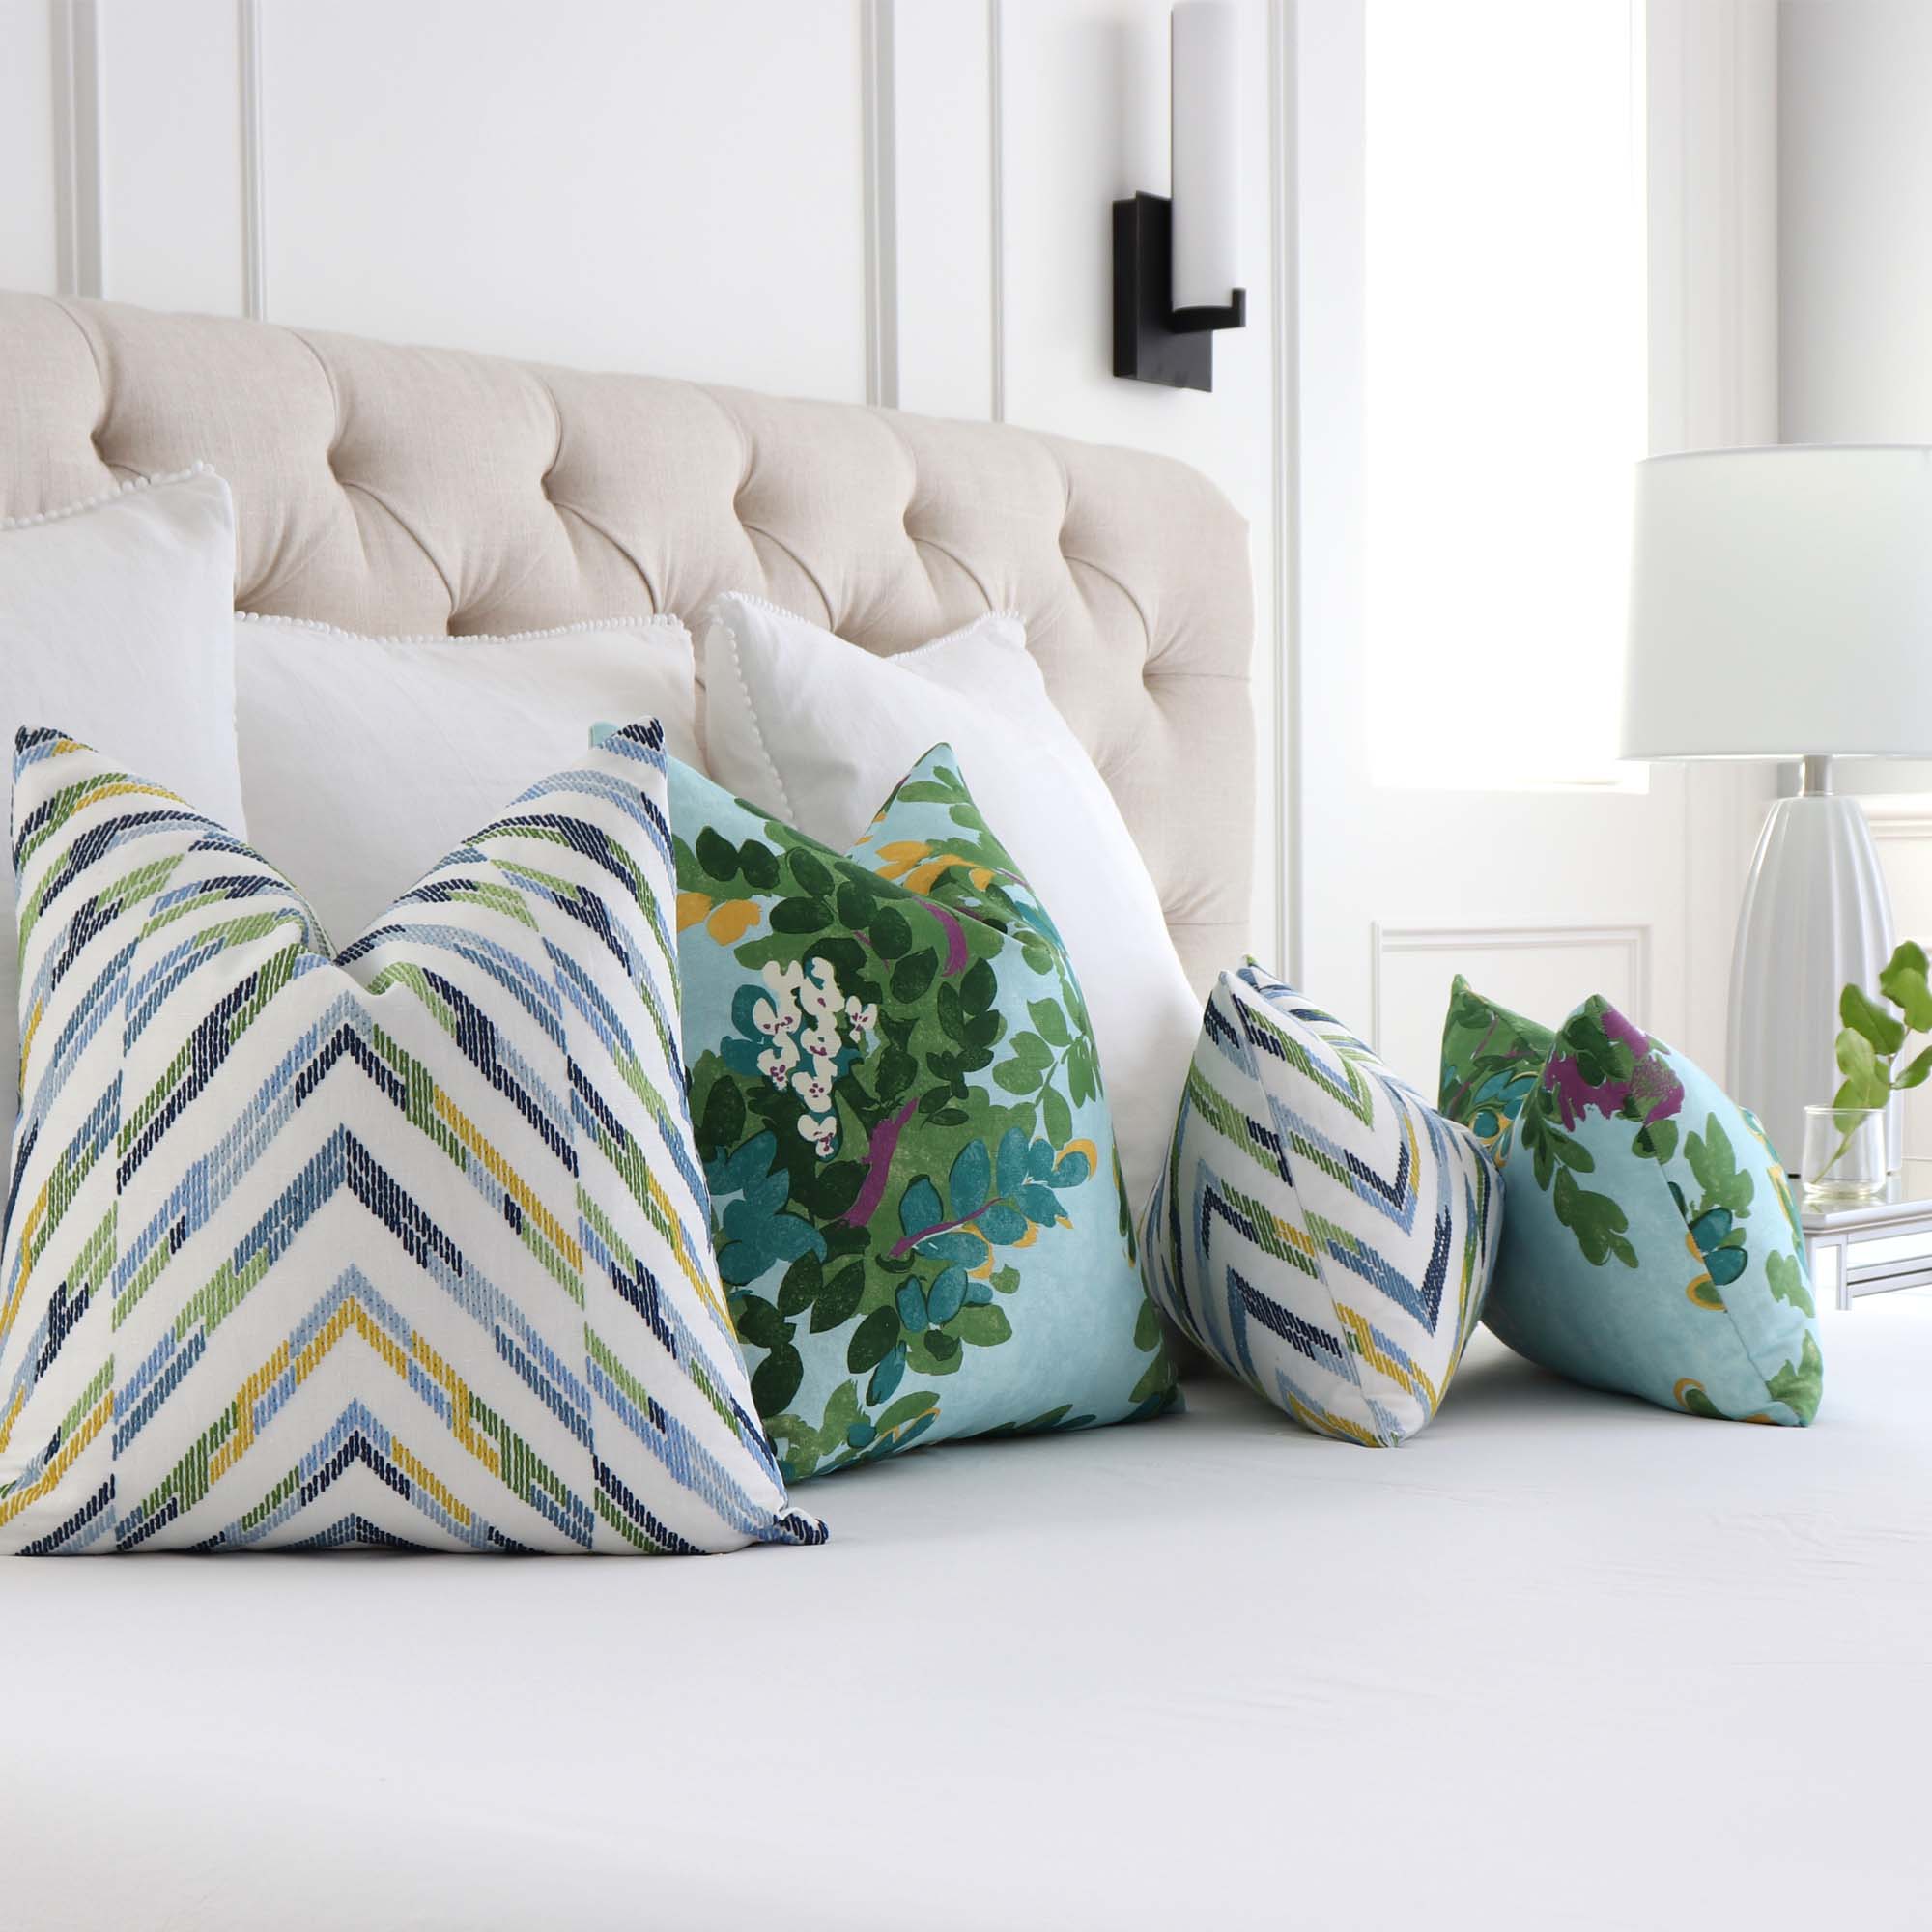 https://www.chloeandolive.com/cdn/shop/products/Thibaut-Hamilton-Embroidery-Blue-Yellow-W714345-Chevron-Geometric-Designer-Luxury-Throw-Pillow-Cover-with-Matching-Pillows_2000x.jpg?v=1627525499